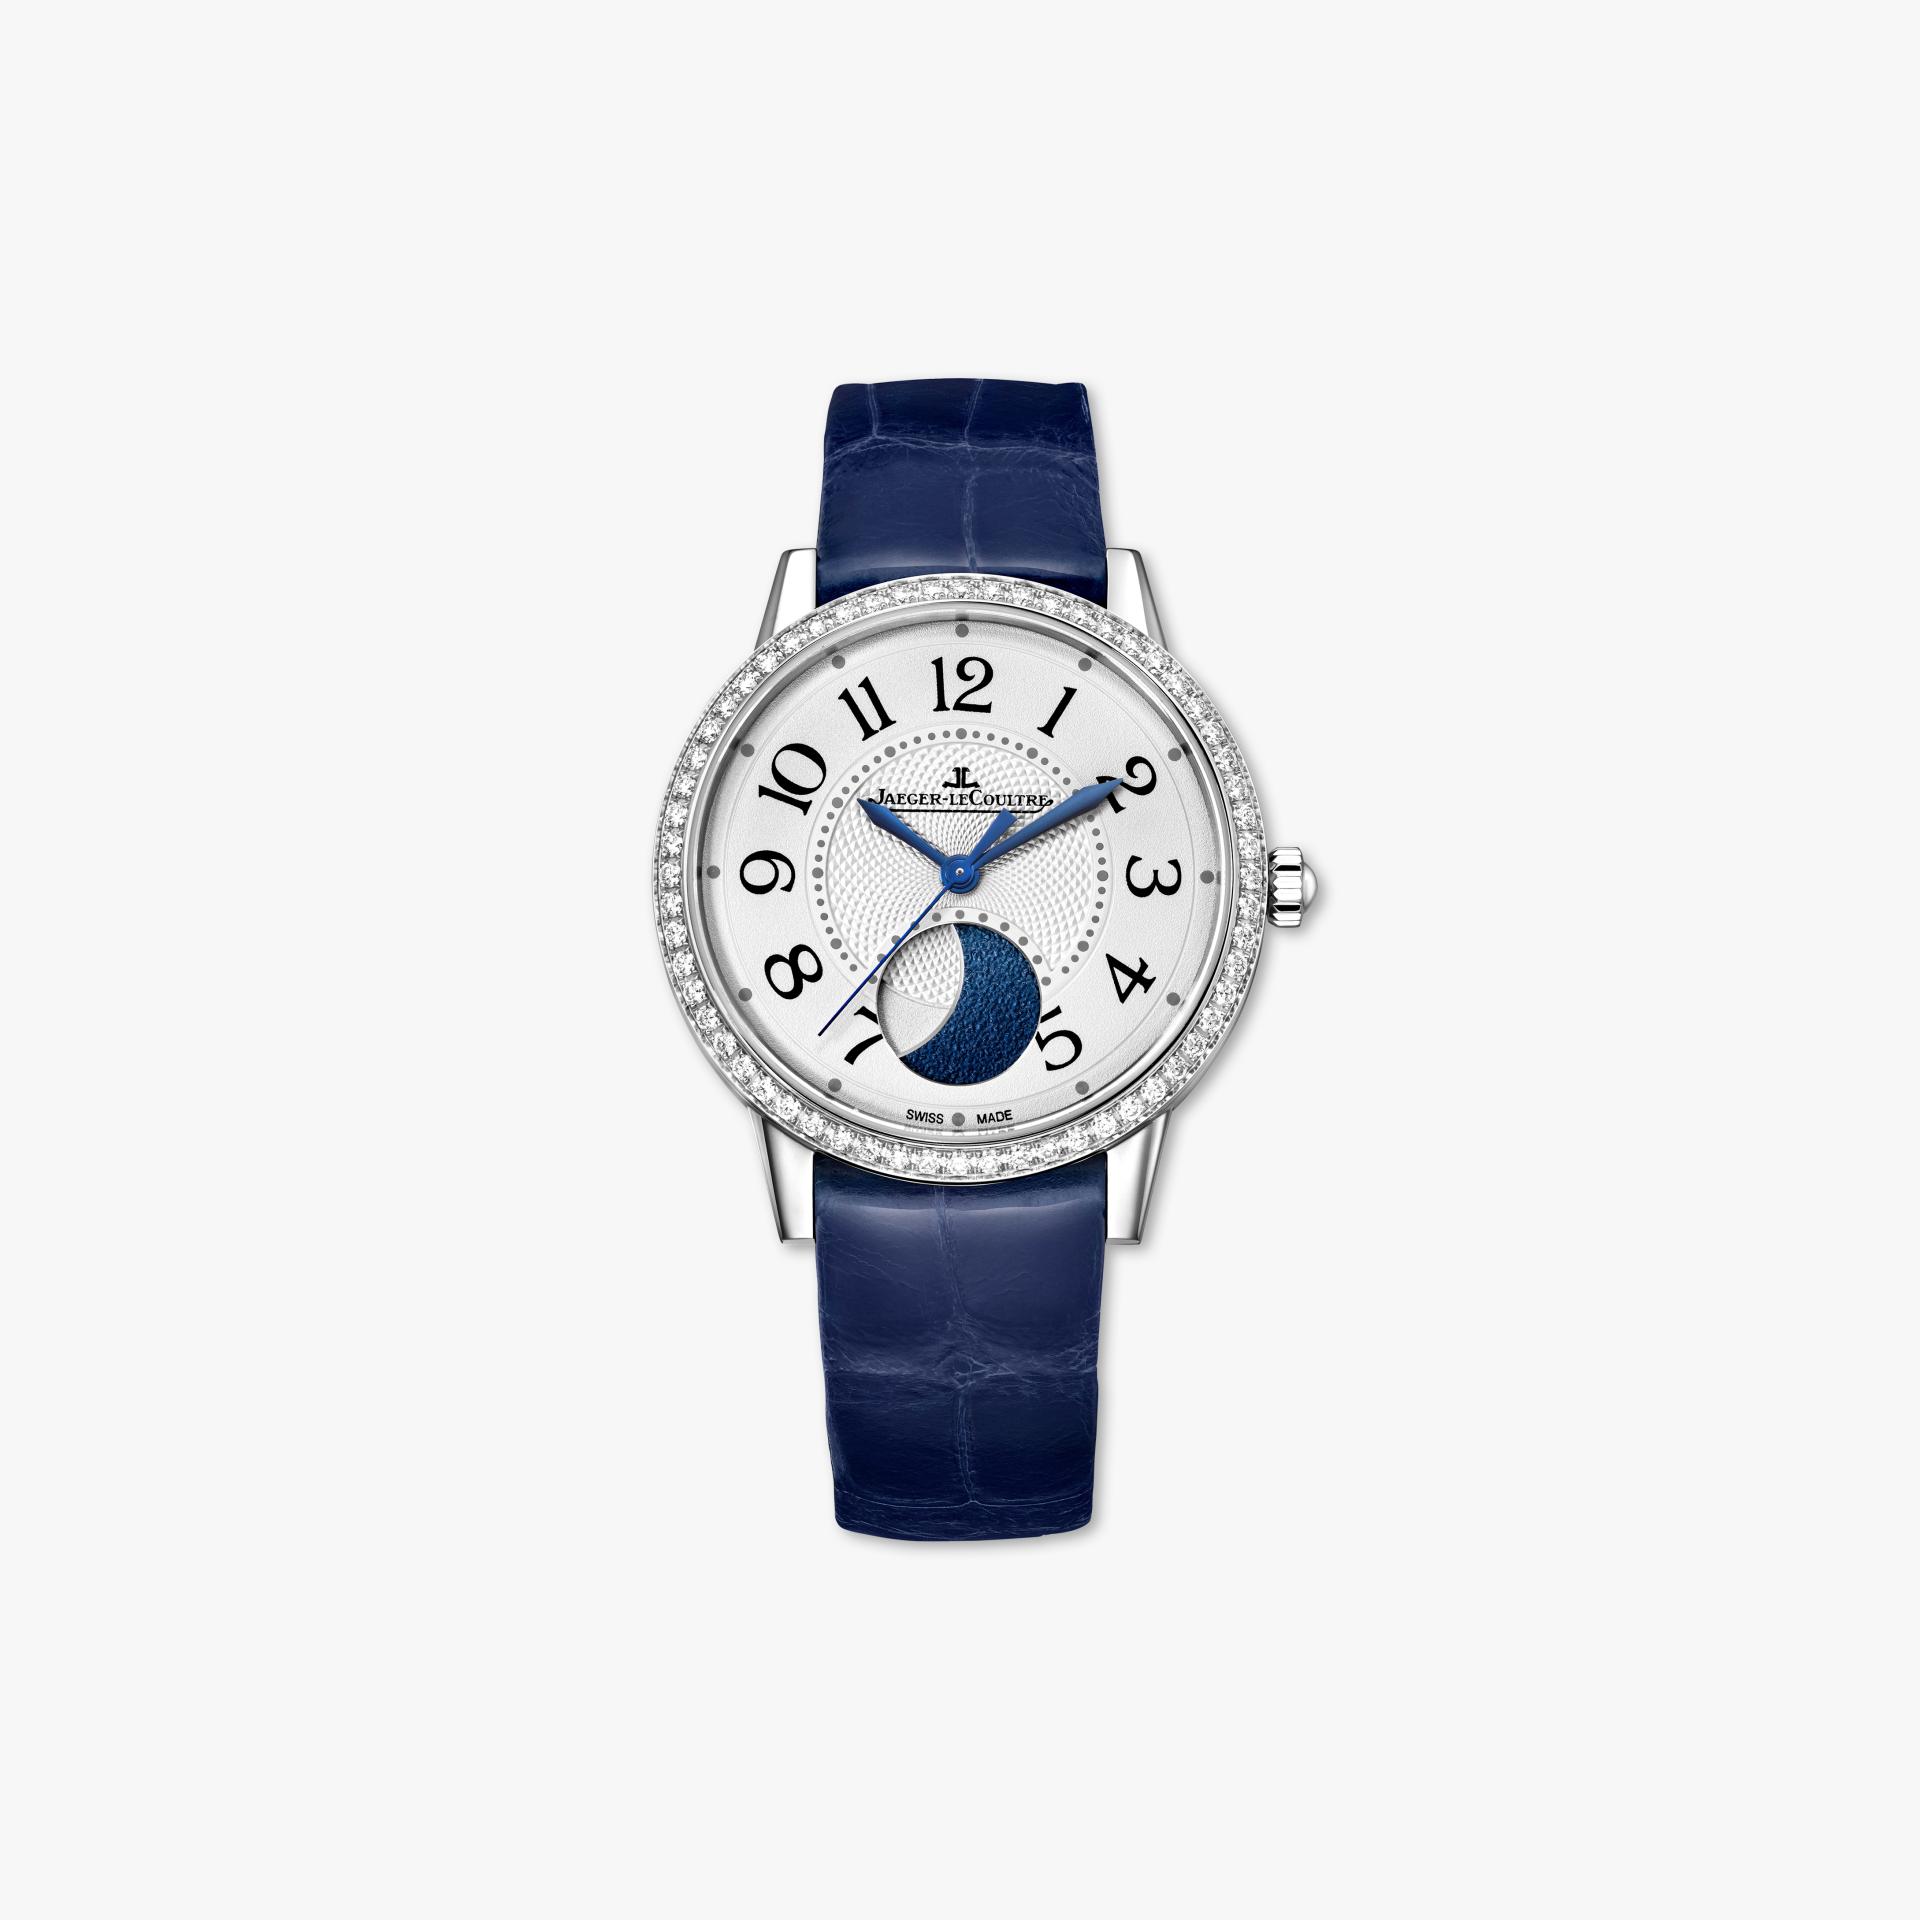 Rendez-Vous Moon Medium made by Jaeger-LeCoultre